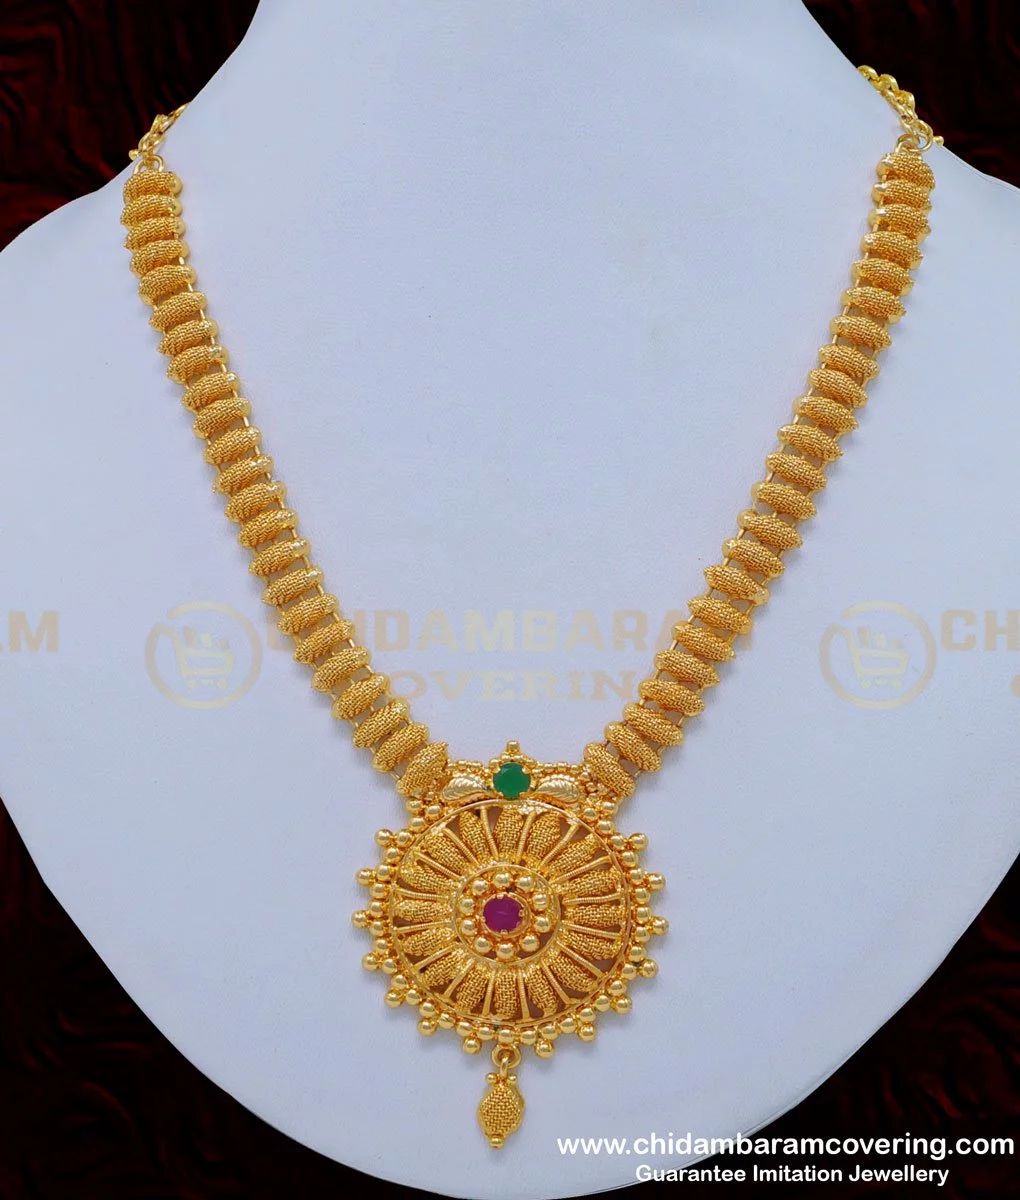 Buy Marriage Bridal Gold Necklace Design Net Pattern Stone ...